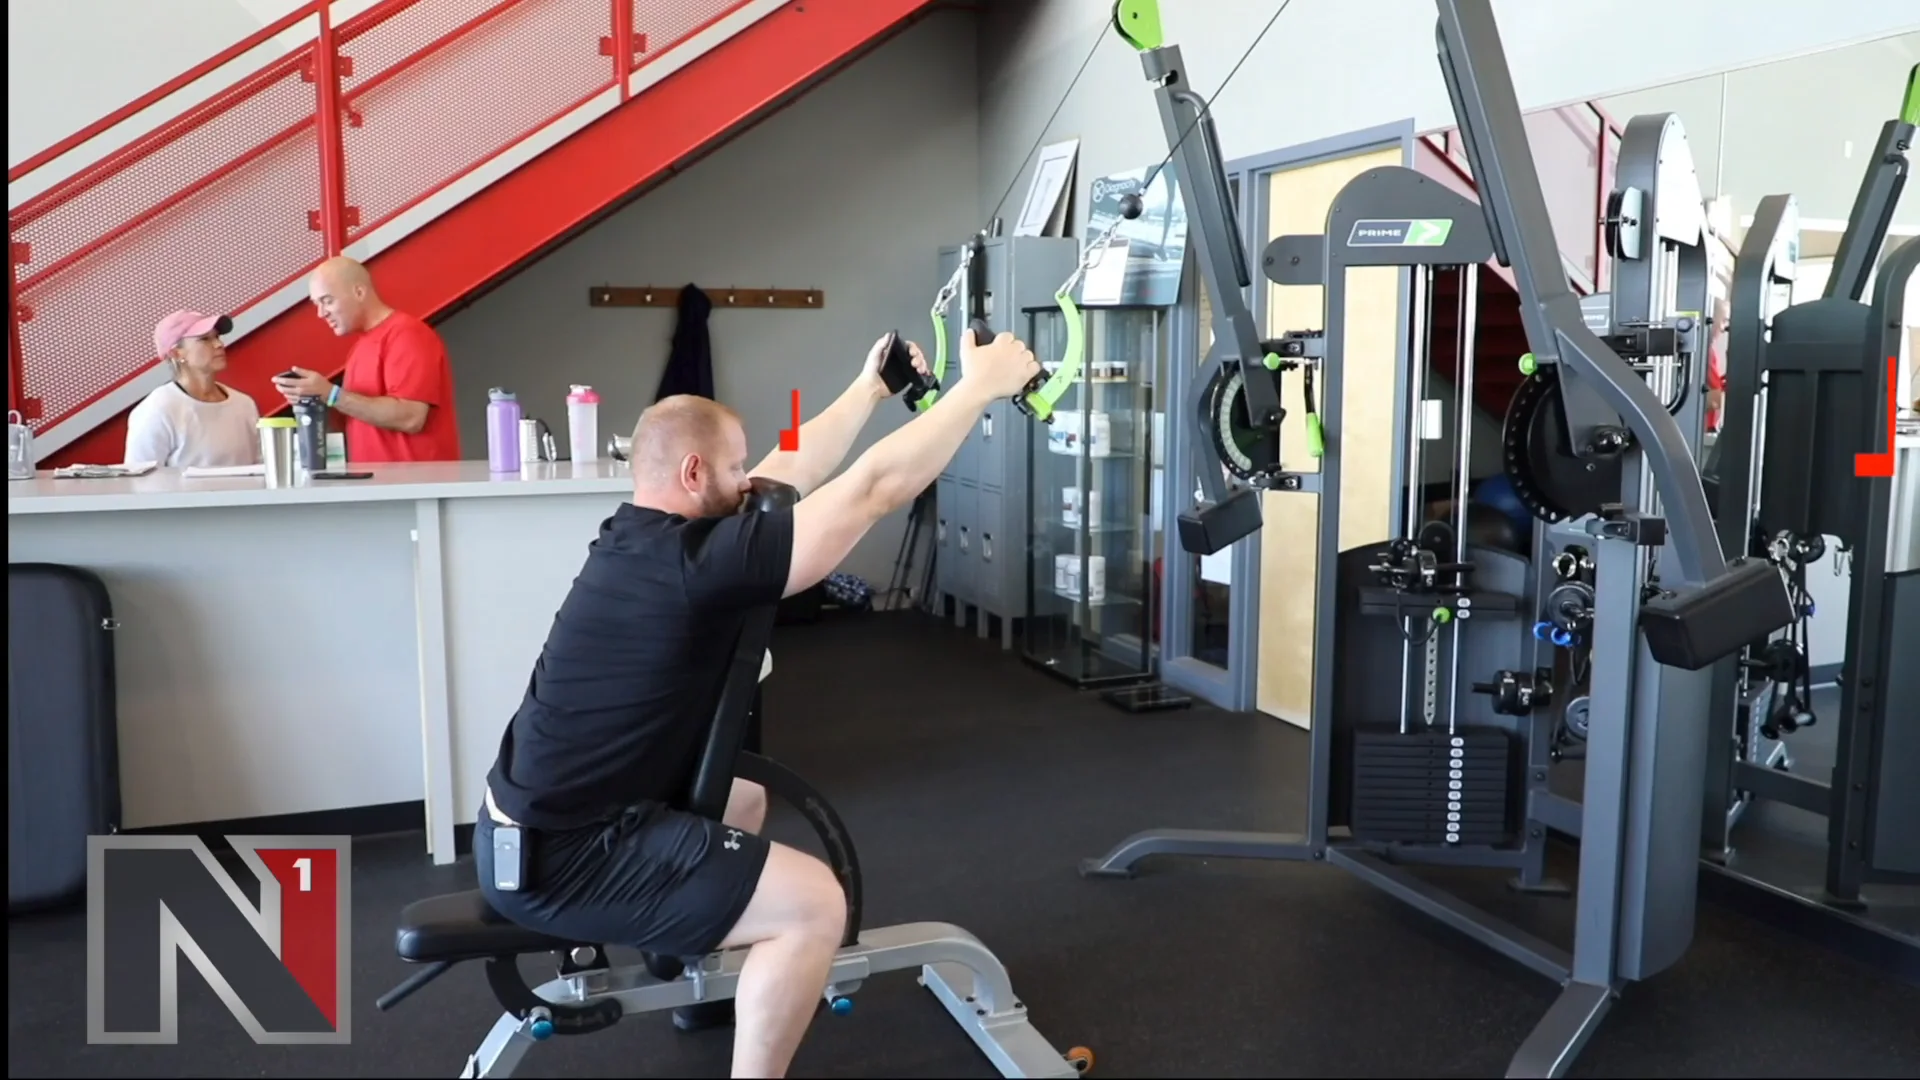 Lats Chest Supported Cable Pulldown - N1 Training.mp4 on Vimeo